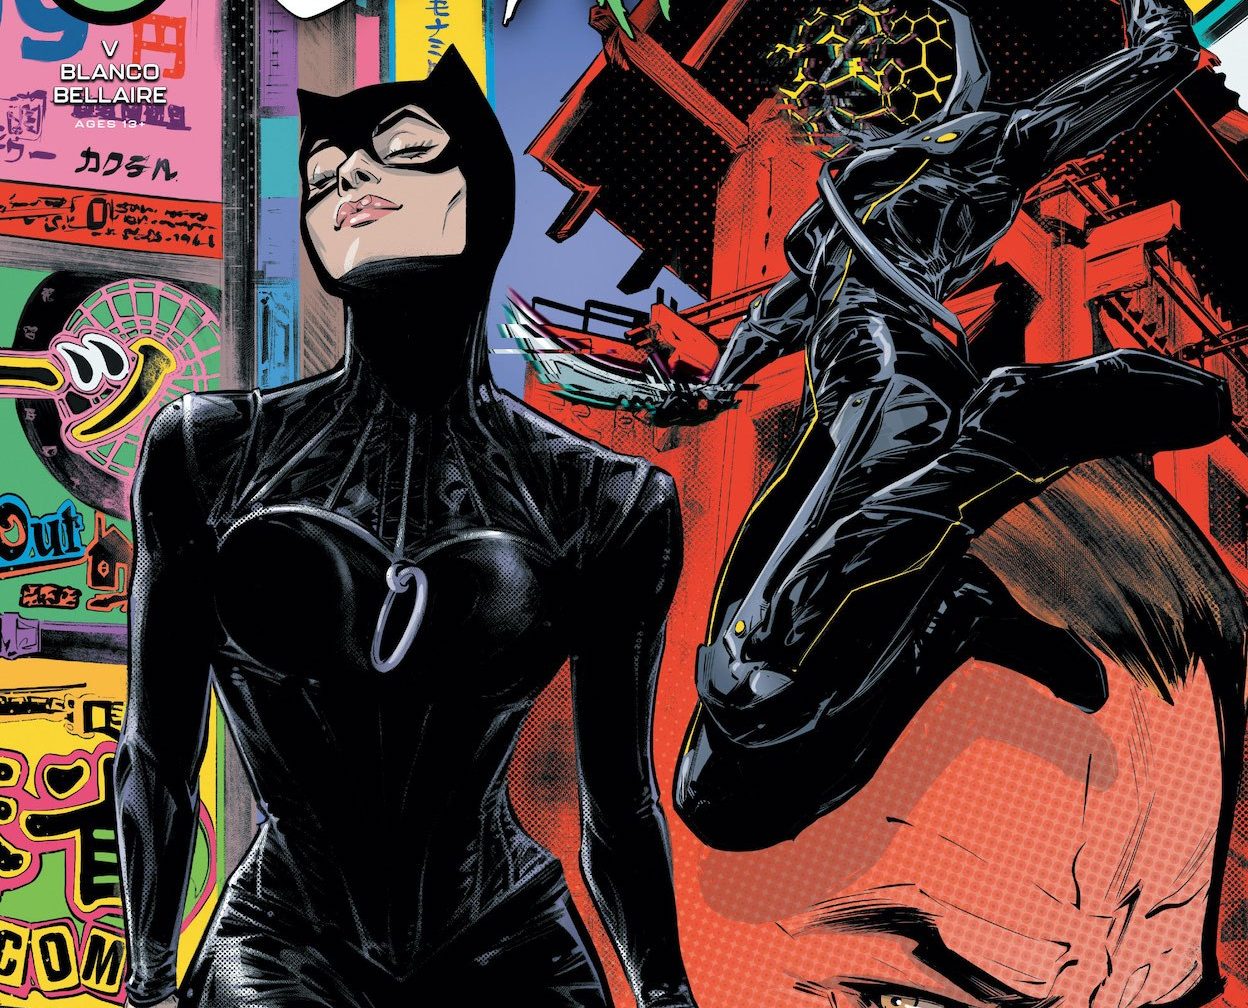 'Catwoman' #29 is a thrilling plunge into Gotham's underworld